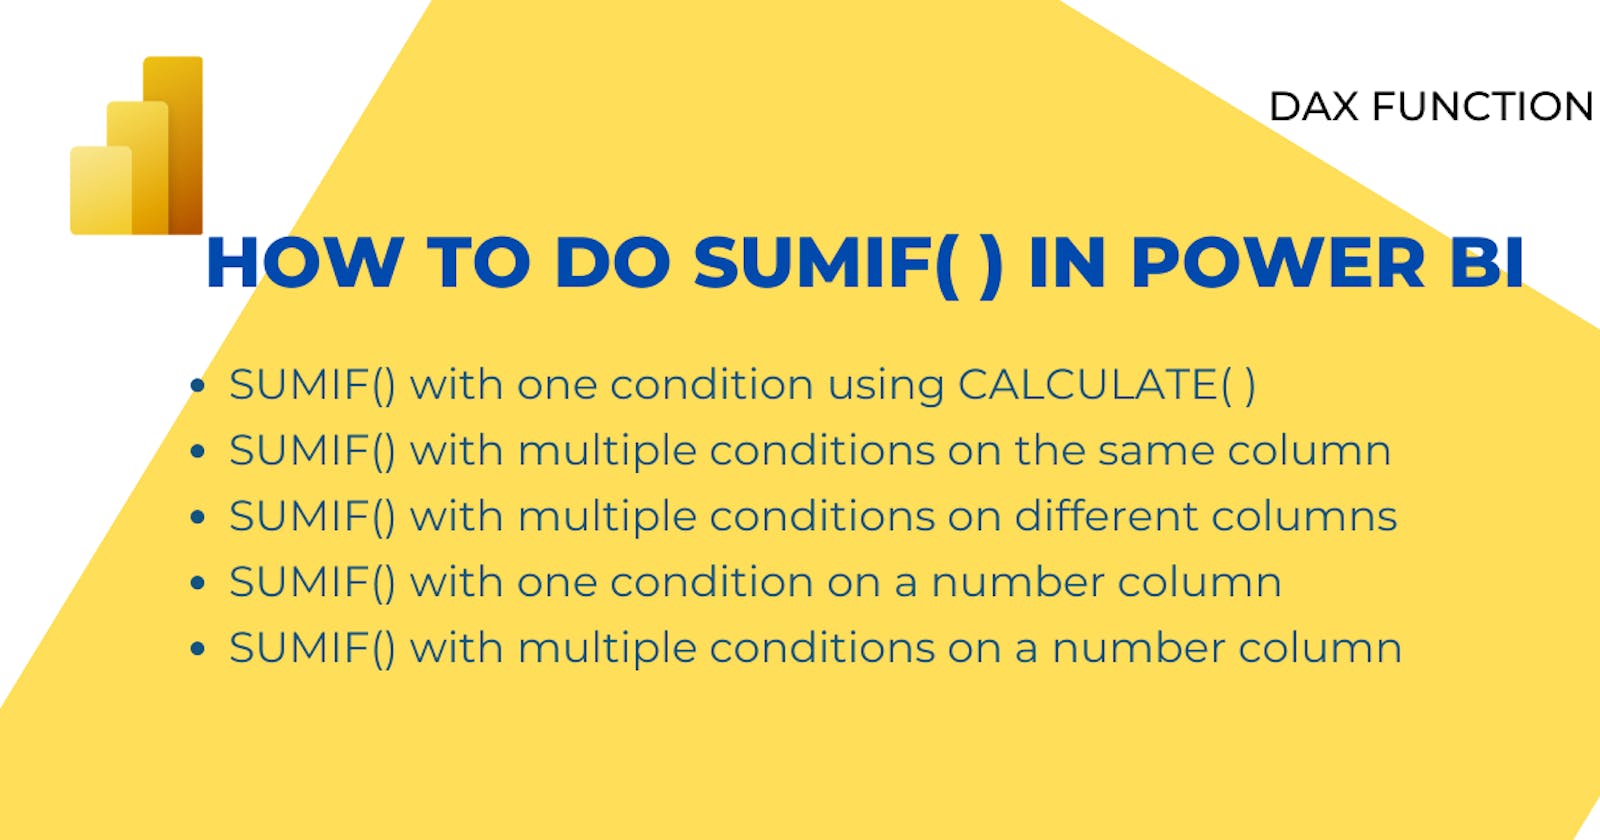 How to do SUMIF( ) in Power BI